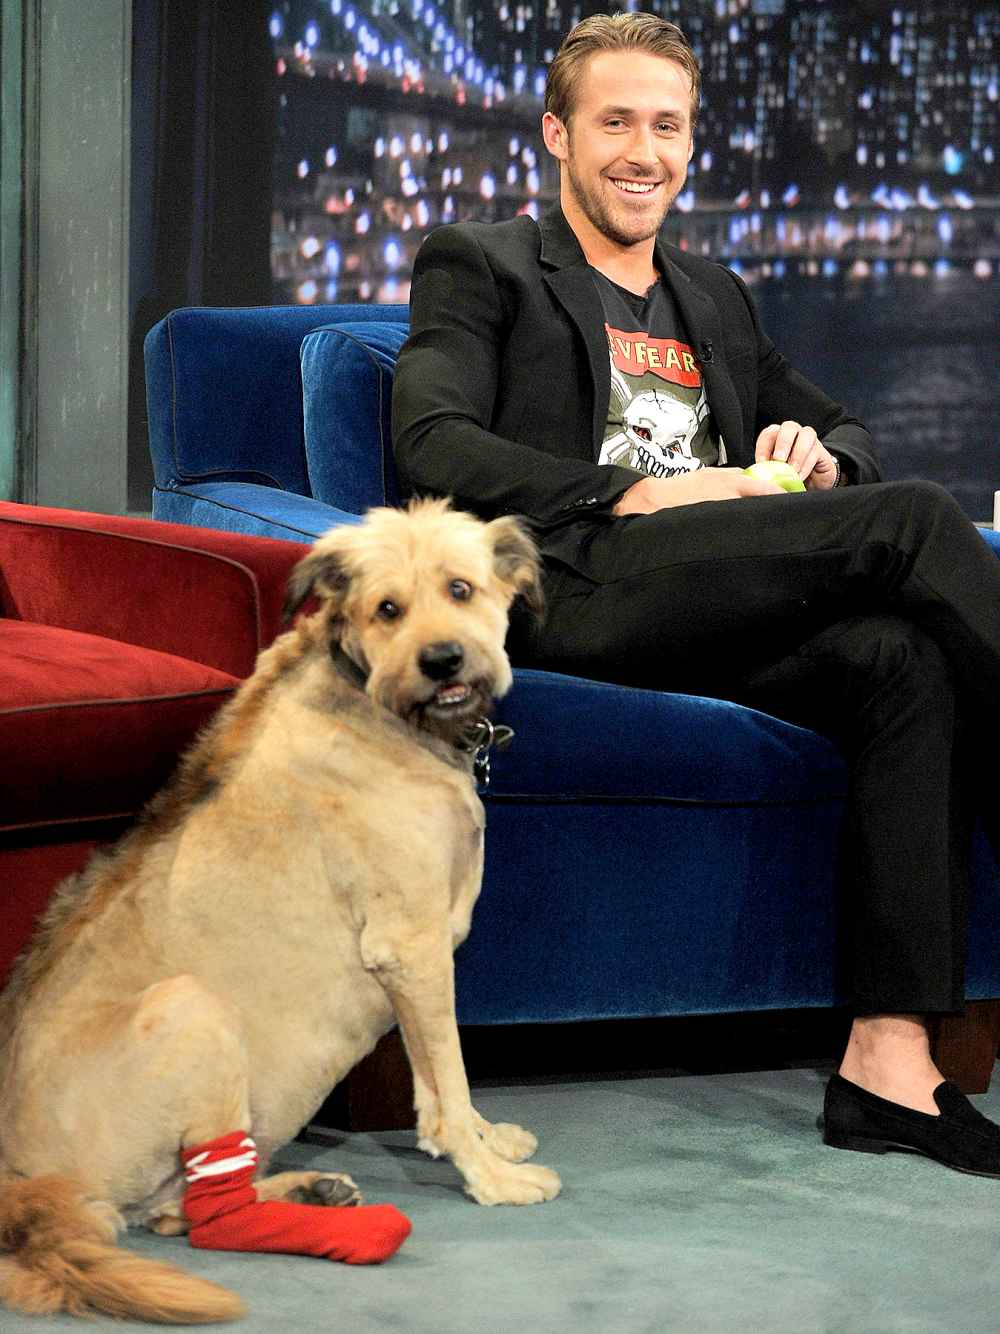 Ryan Gosling along with his dog George visits "Late Night With Jimmy Fallon" at Rockefeller Center on July 20, 2011 in New York City.